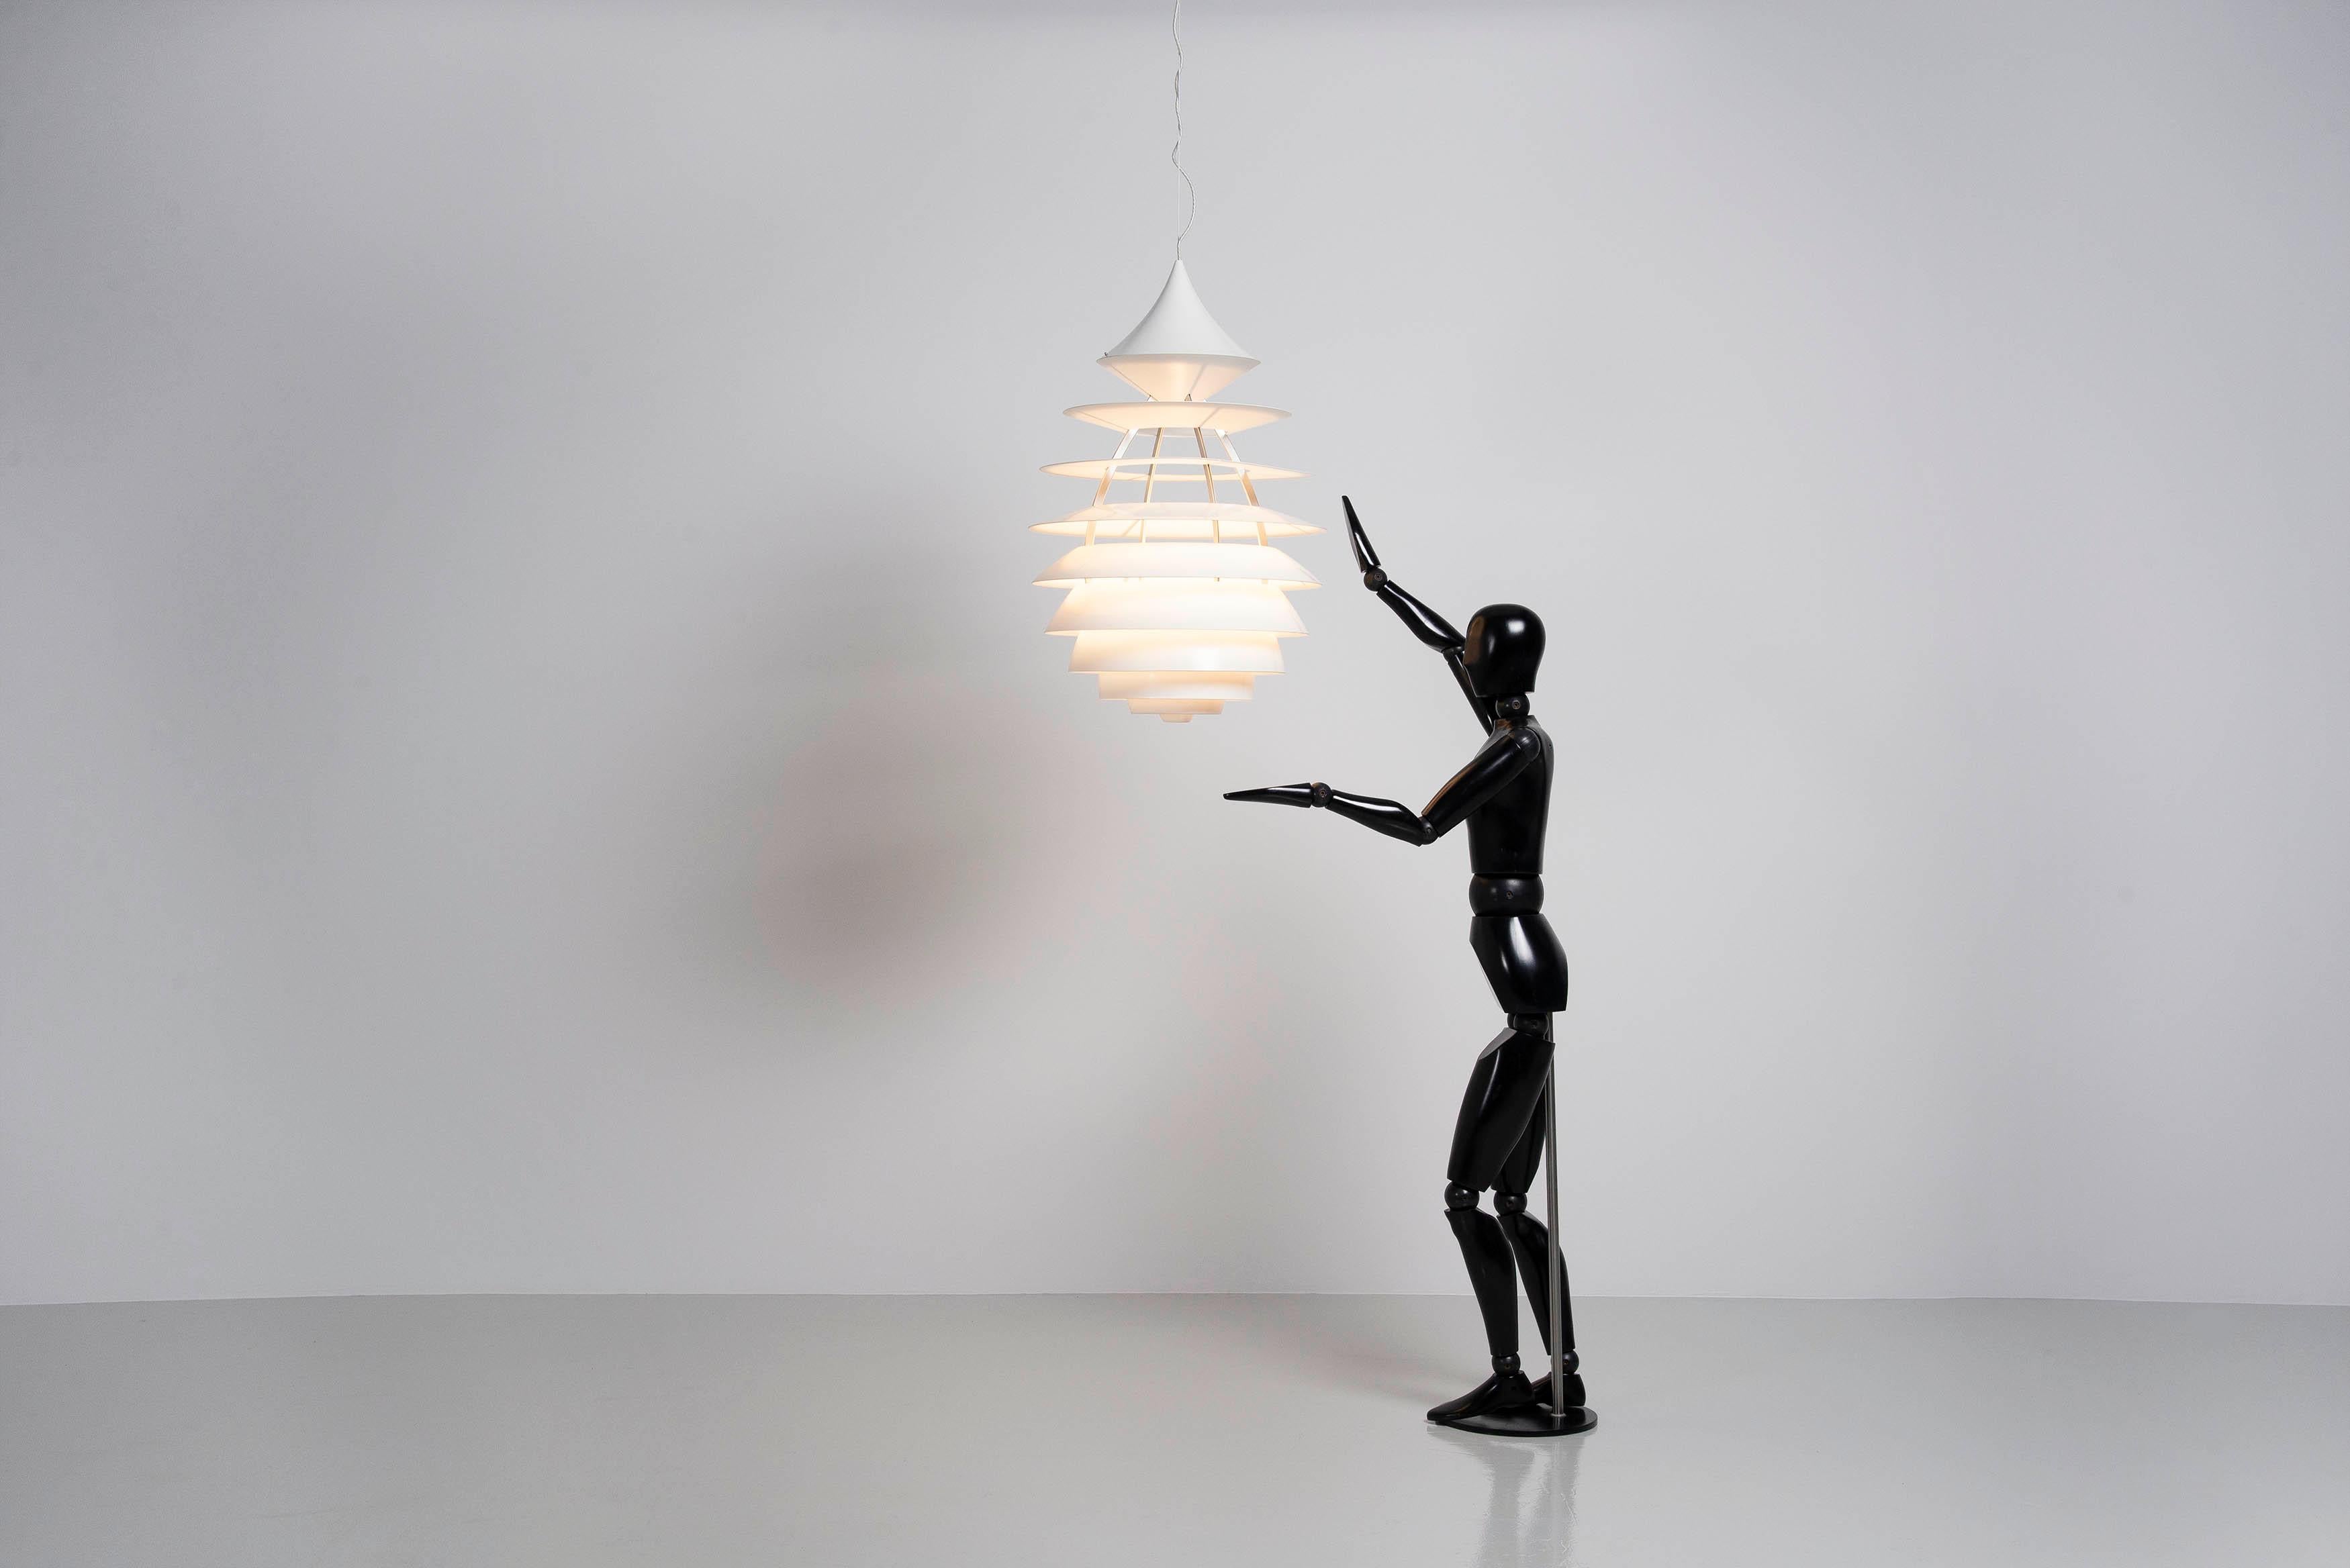 Monumental 'LP Centrum' chandelier designed by Kurt Norregaard and Poul Henningsen and manufactured by Louis Poulsen, Denmark 1990. This super nice and large sized chandelier has an aluminium structure with aluminium layered shades which give a very